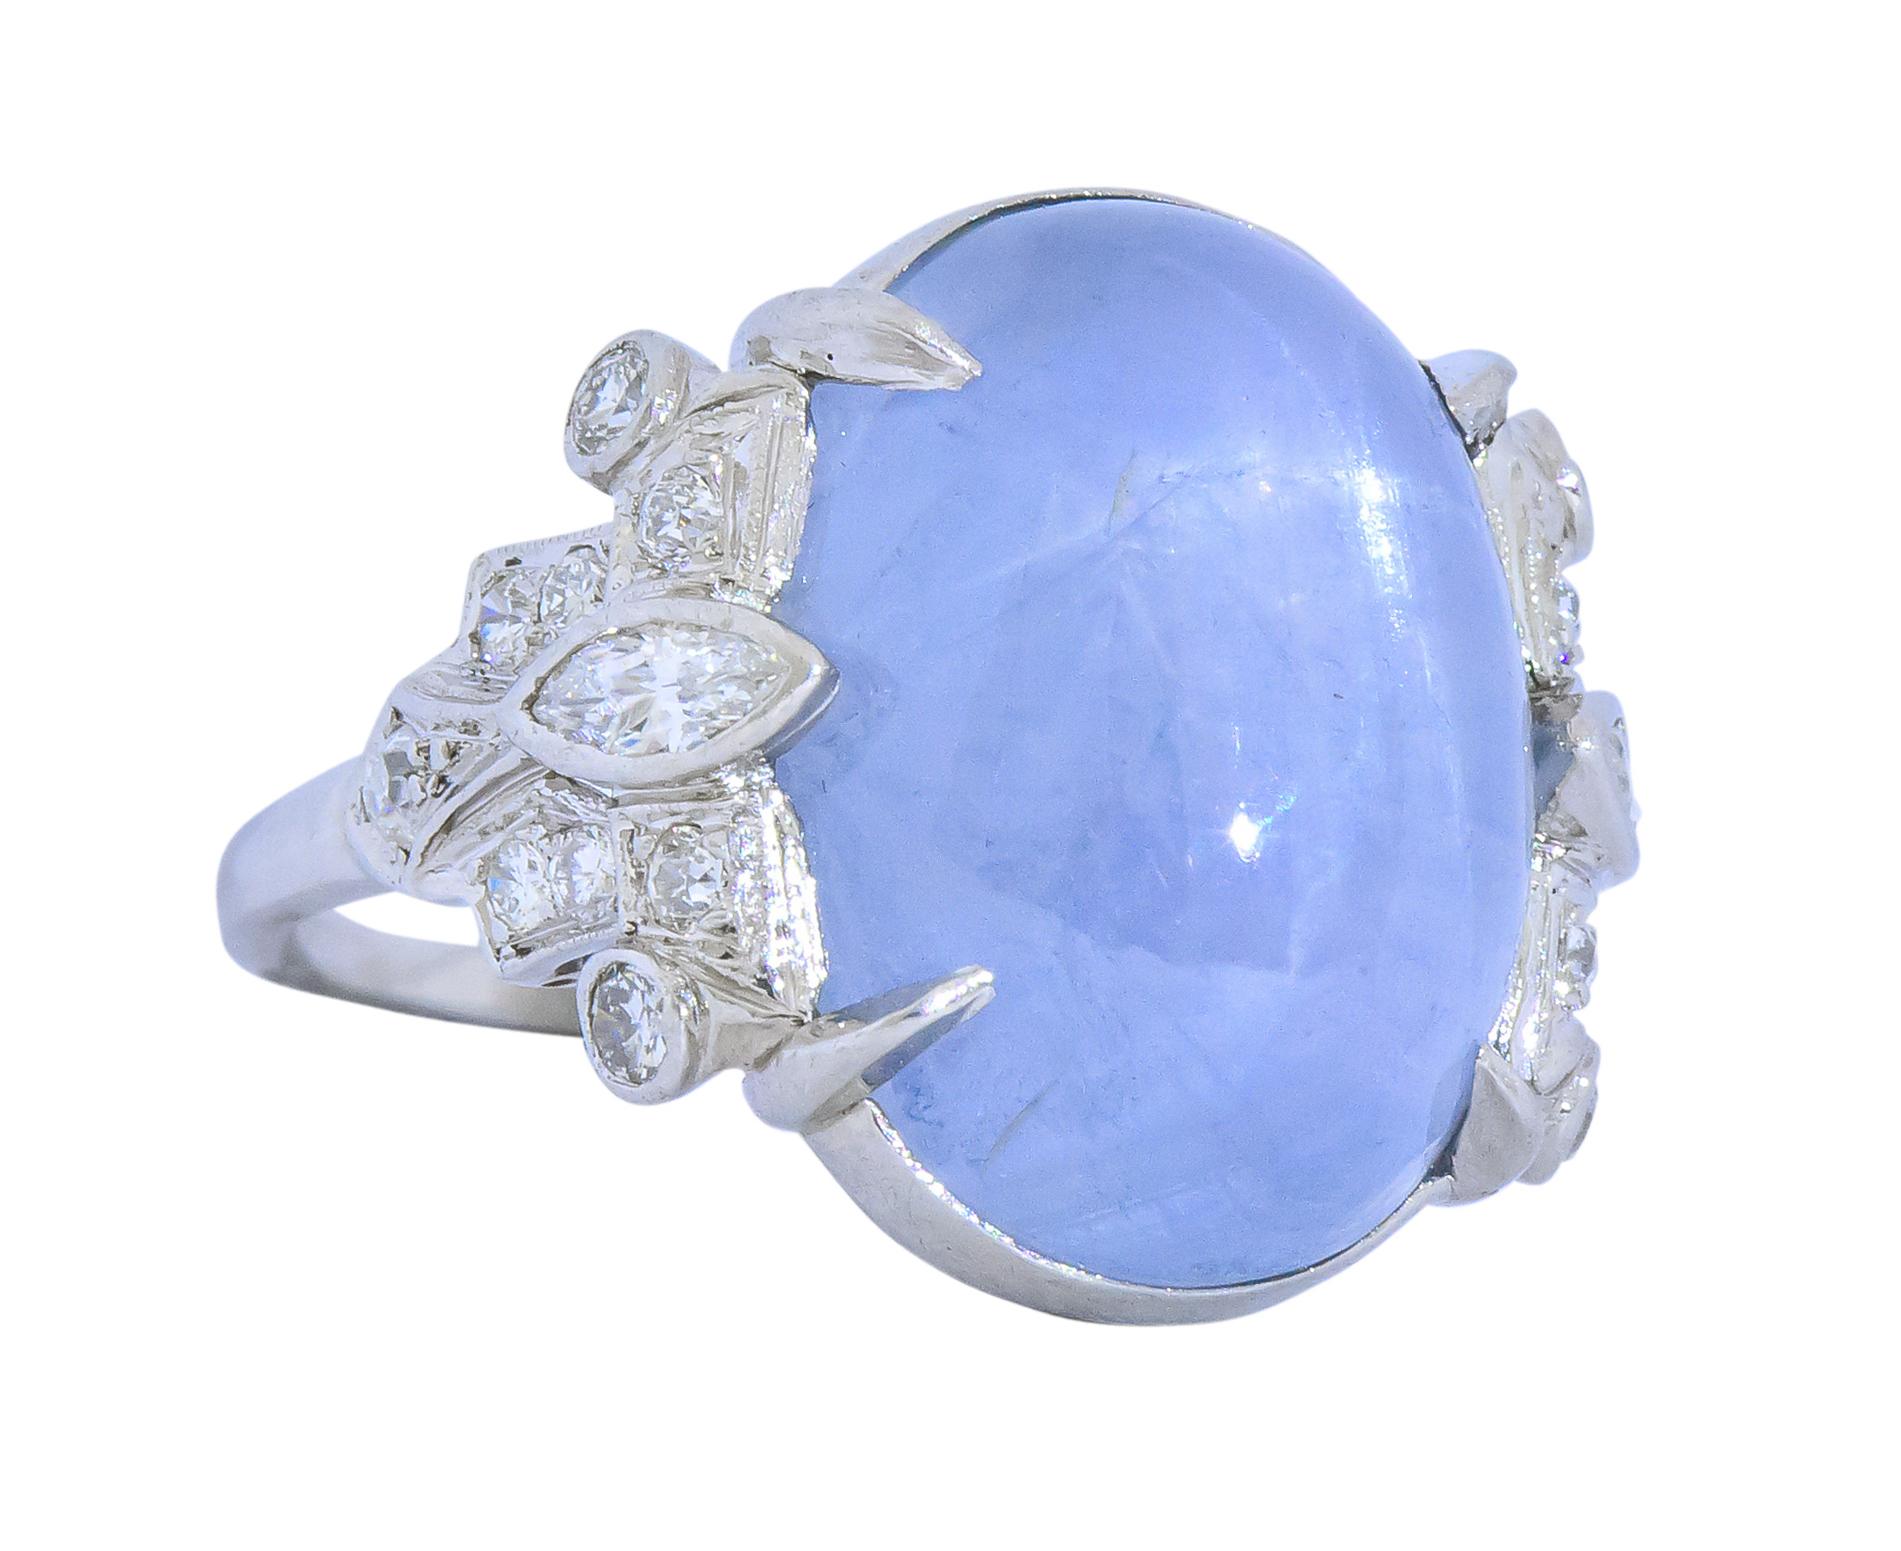 Centering a claw set star sapphire cabochon weighing approximately 22.00 carats

Translucent grayish-blue with a strong six rayed star

Flanked by marquise and old European cut diamonds weighing 0.90 carat; eye-clean and white

Tested as